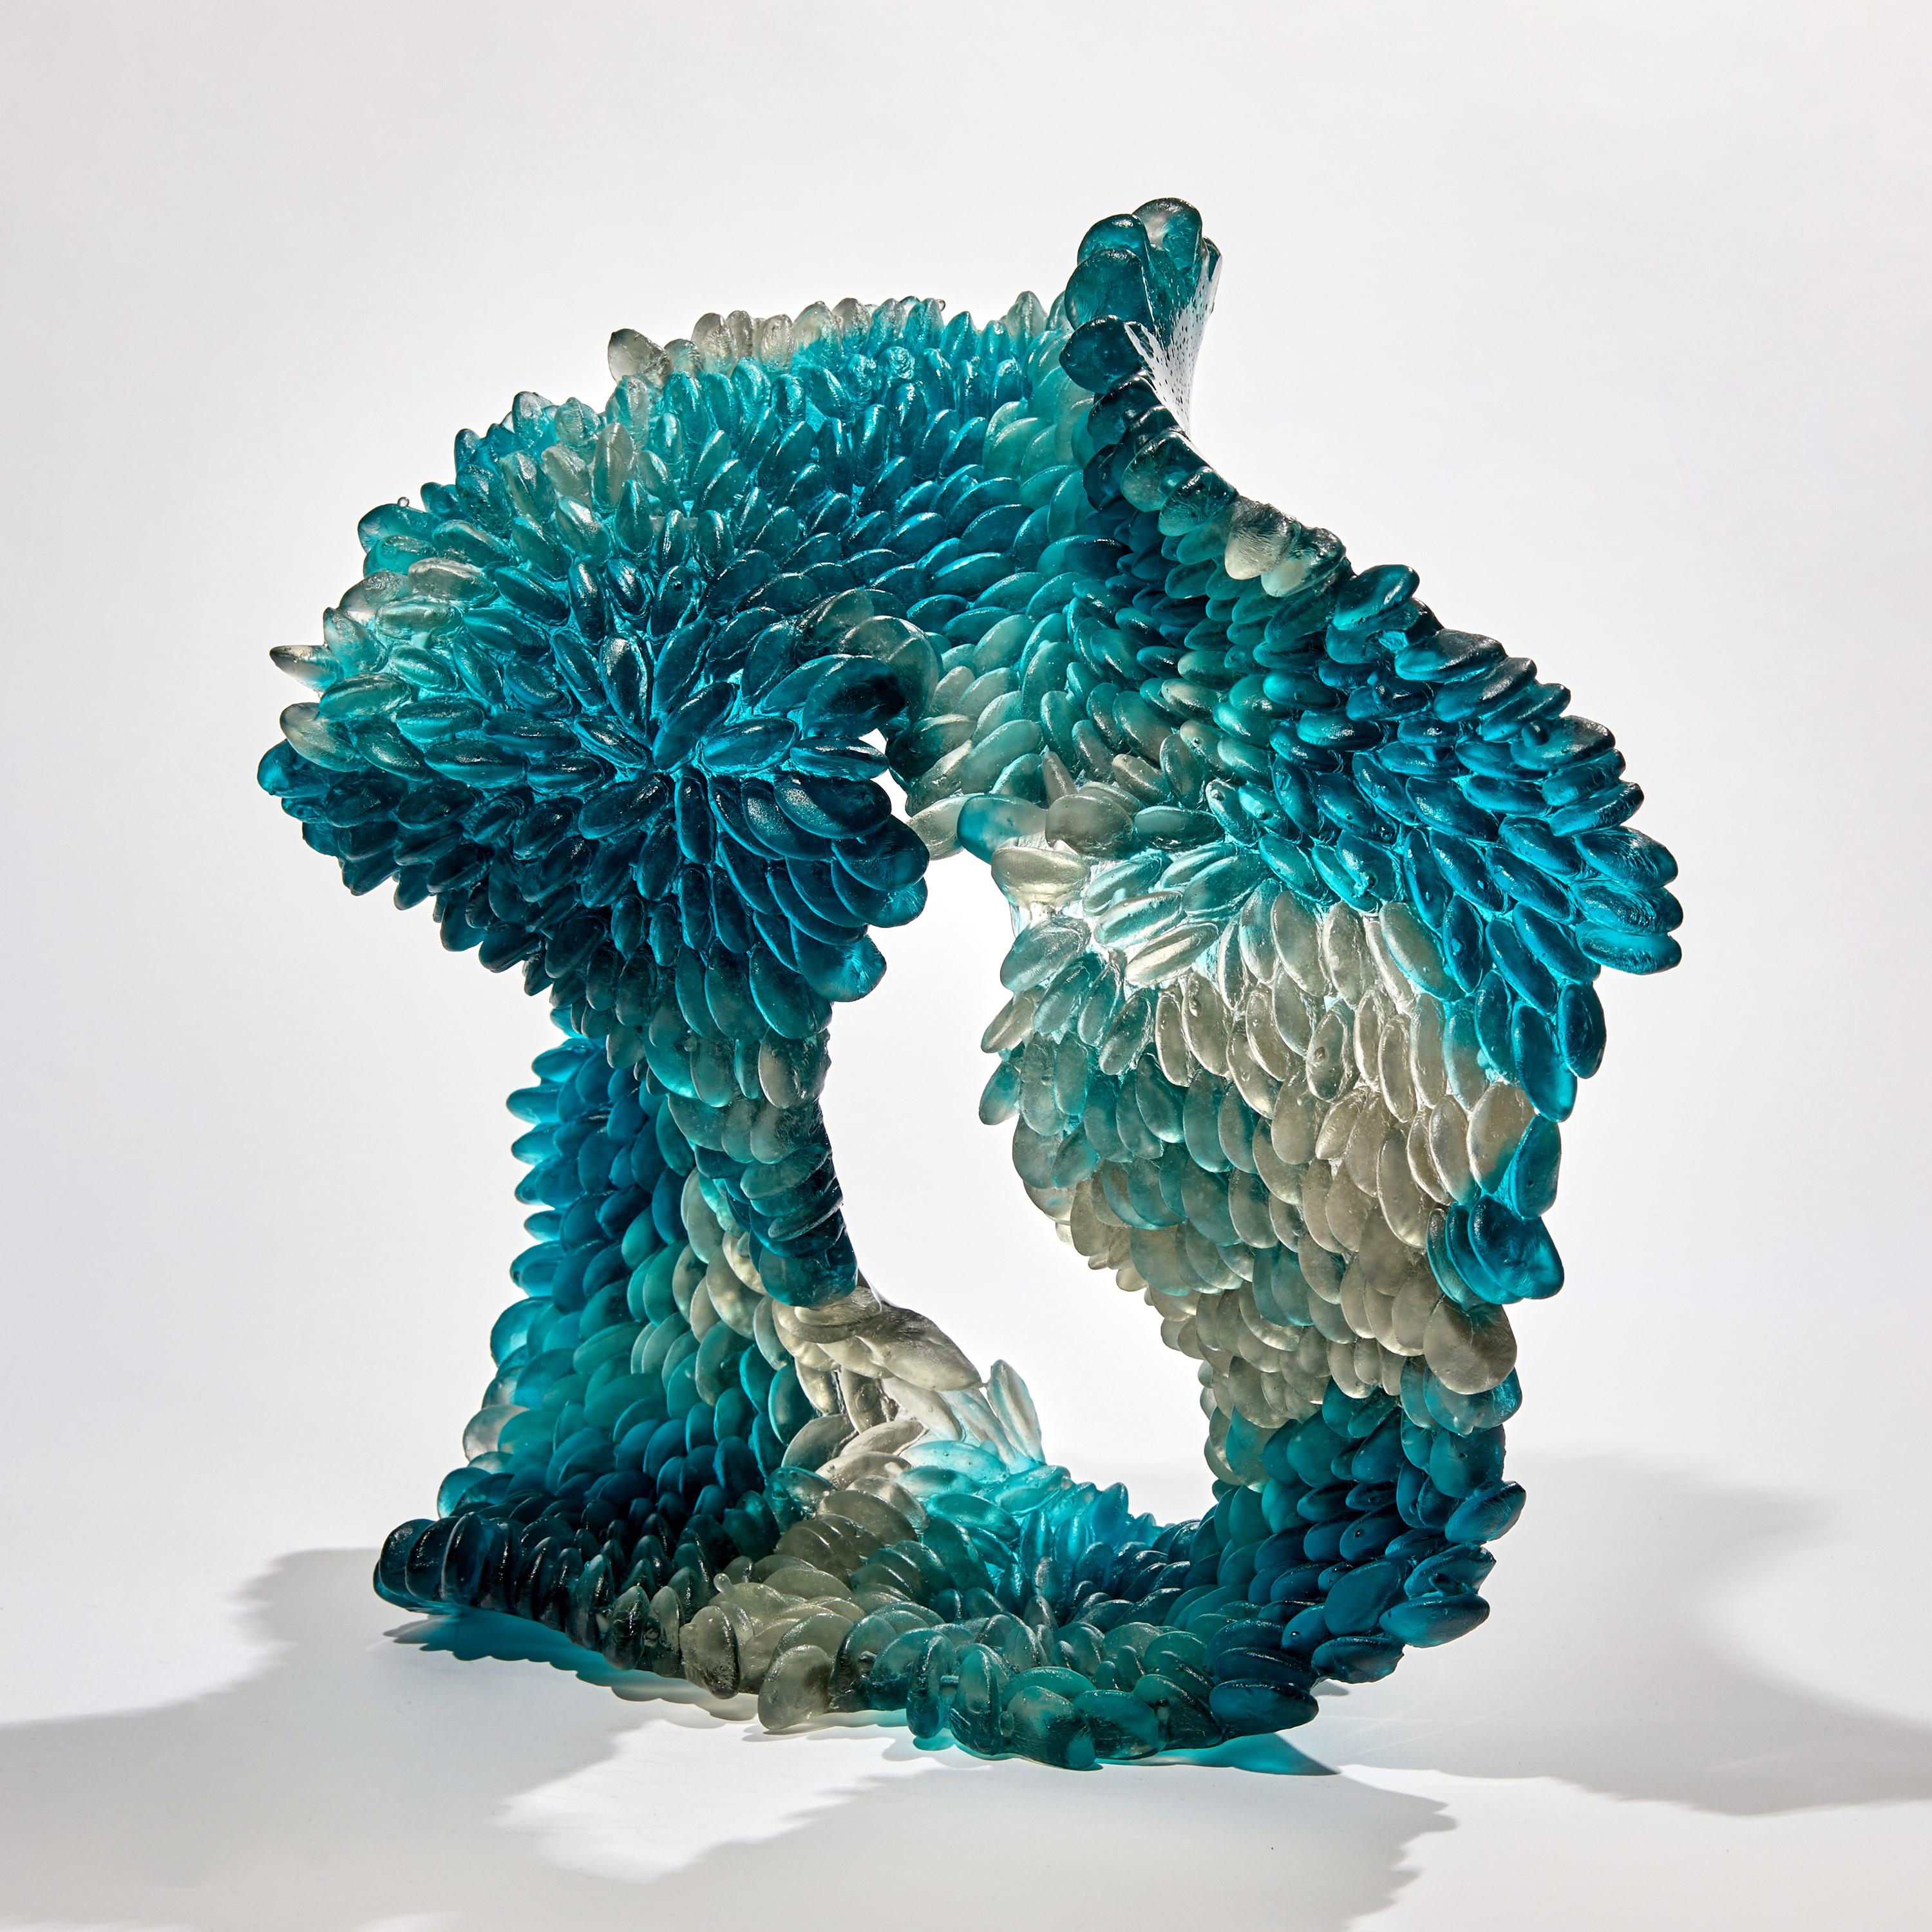 Organic Modern  Blue Stain, Unique Glass Sculpture in Teal Blue & Grey by Nina Casson McGarva